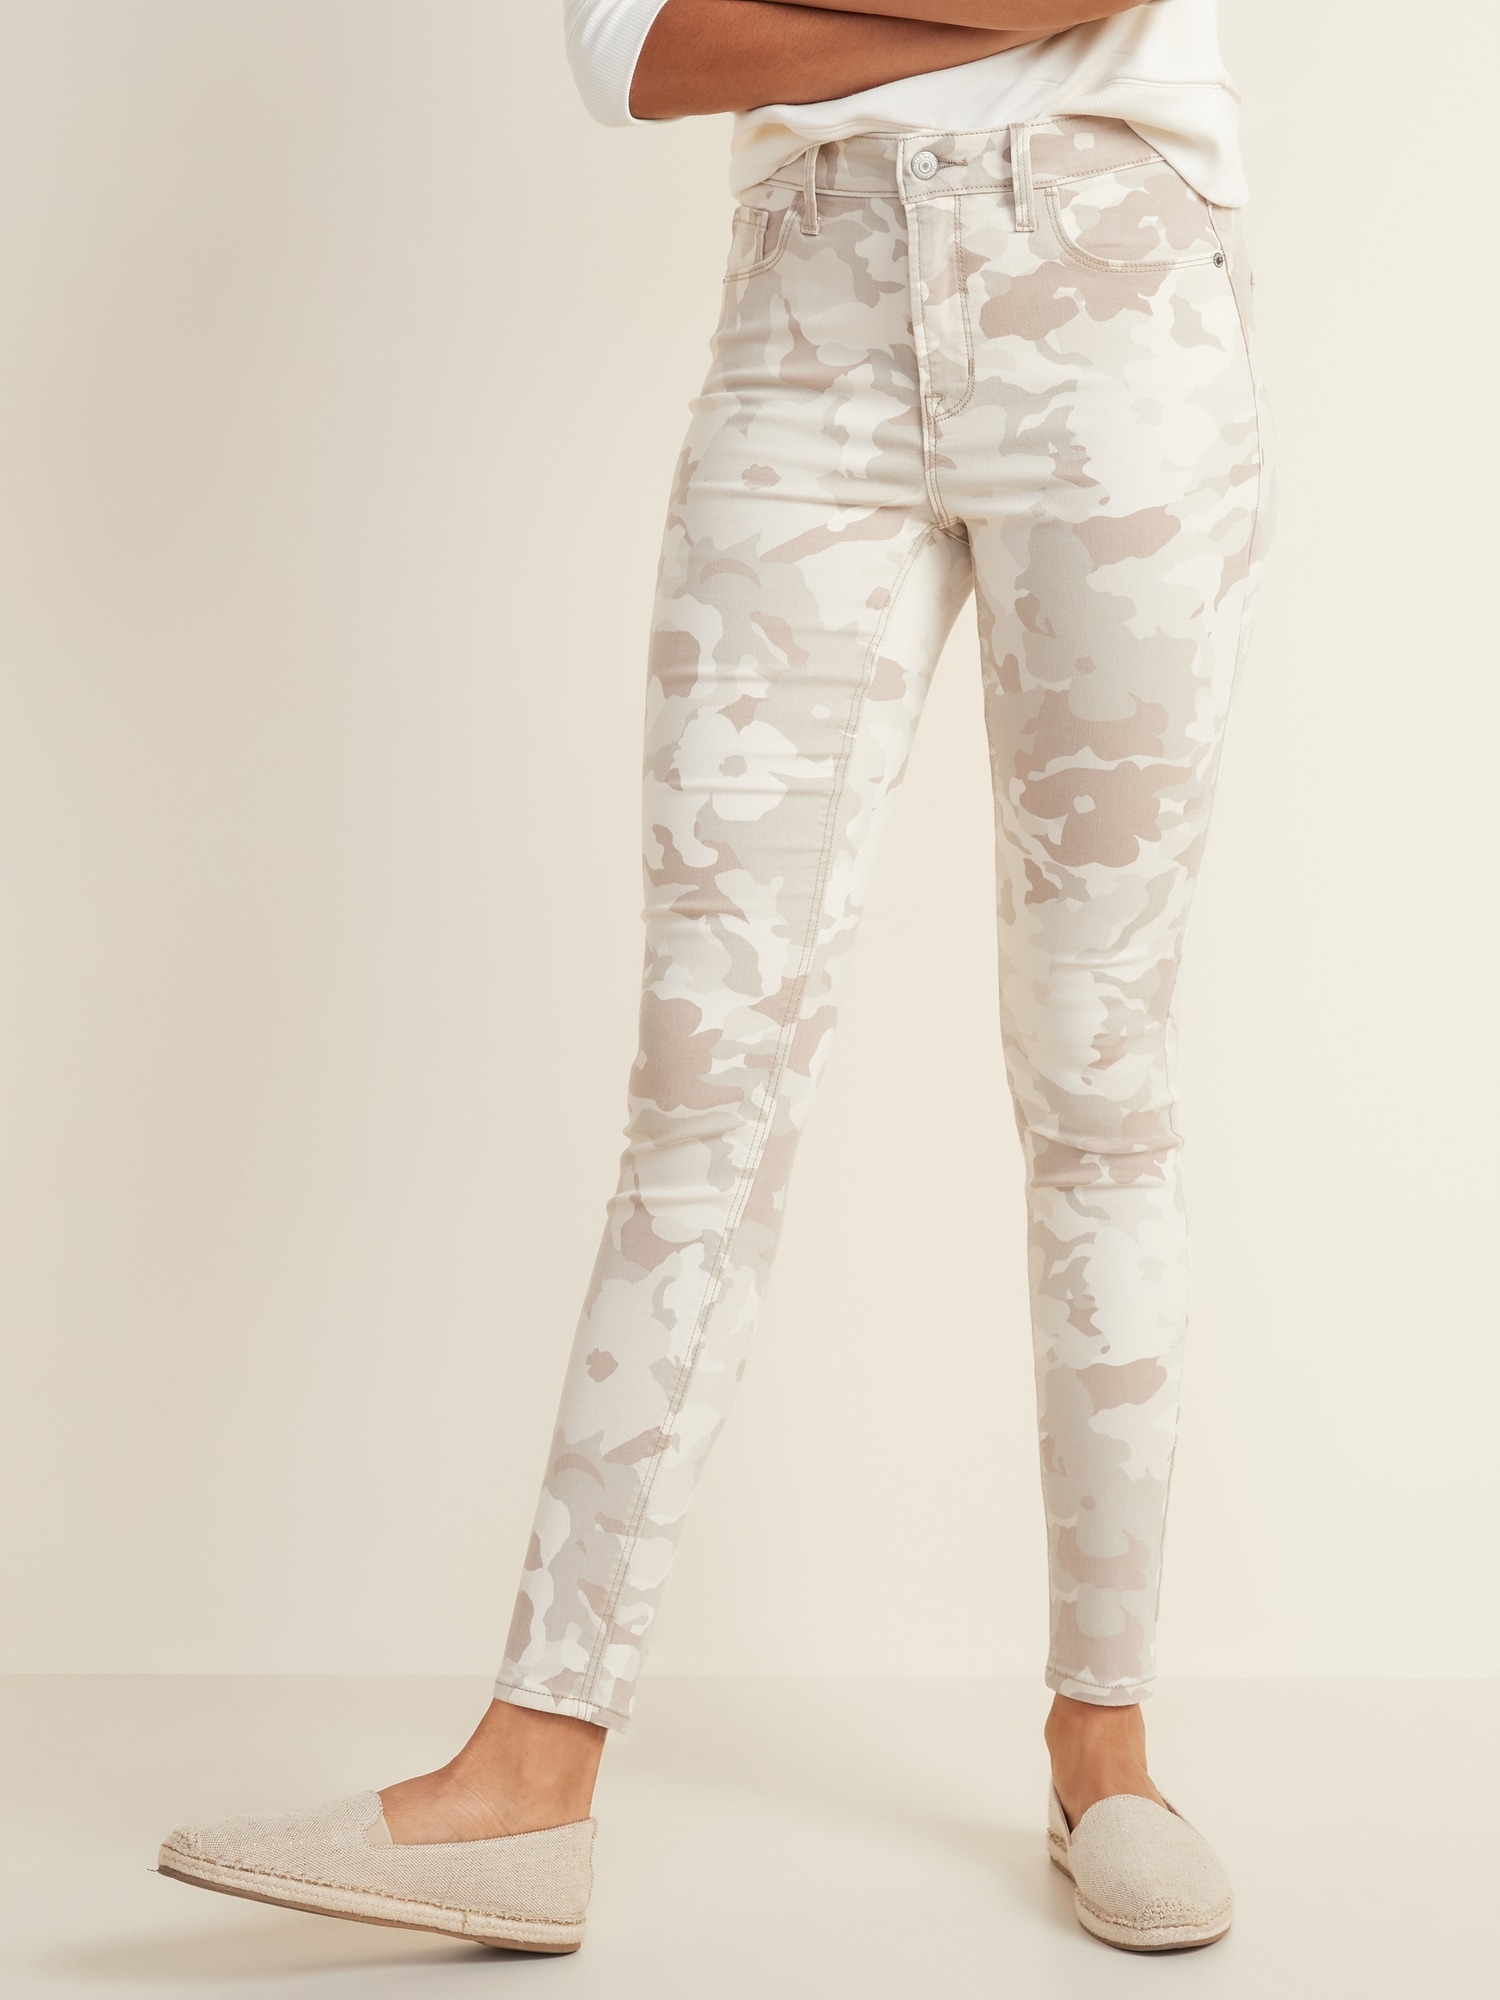 army print jeans for womens